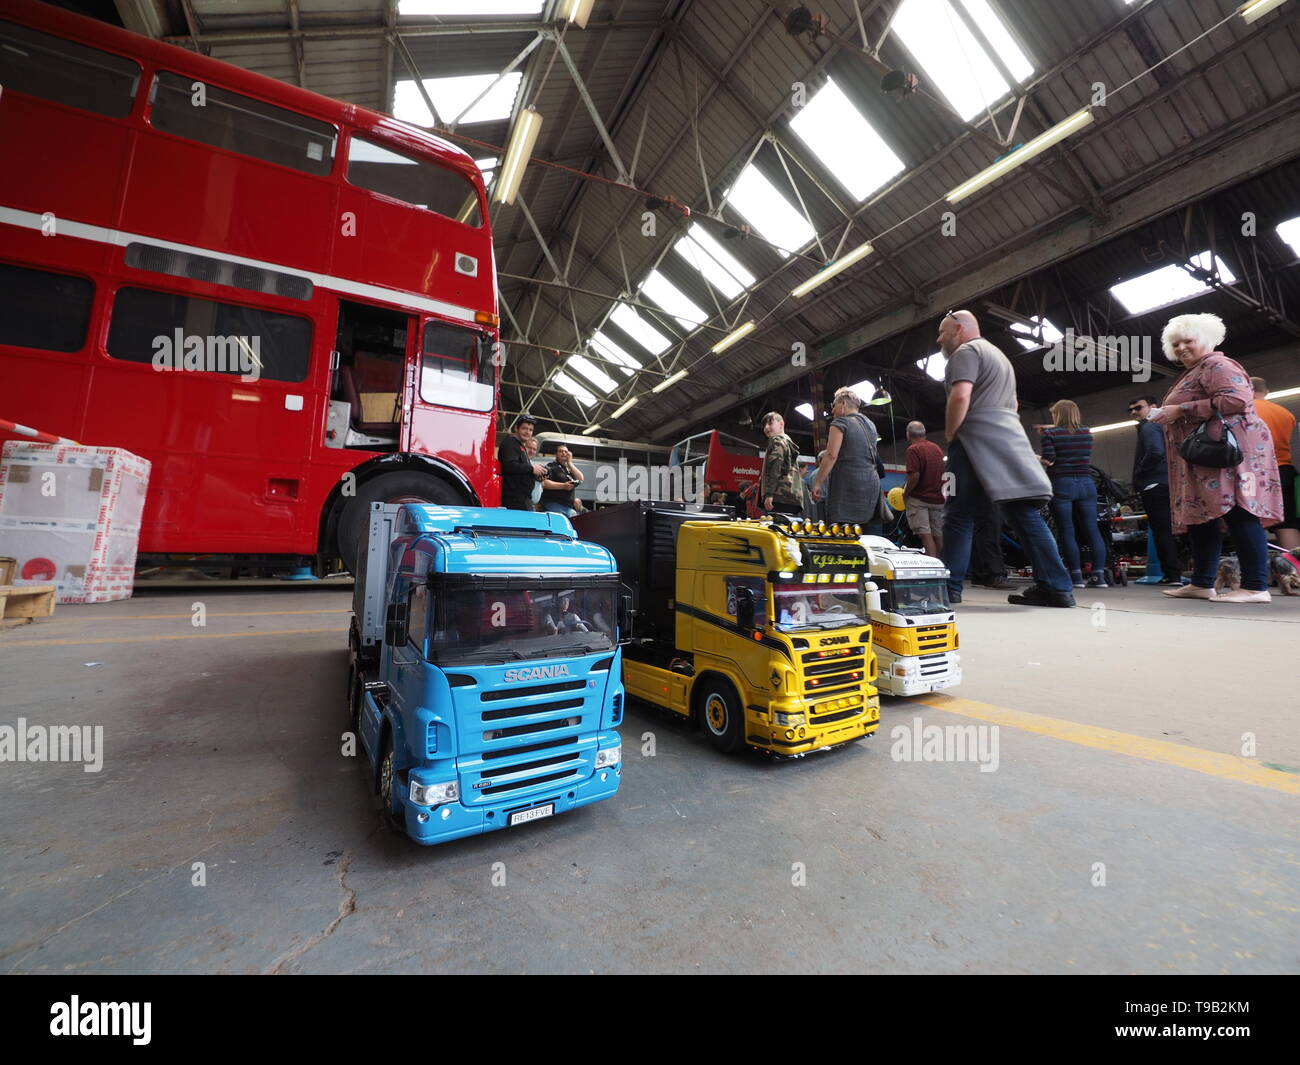 Faversham, Kent, UK. 18th May, 2019. 25th Faversham Transport Weekend: the first day of this annual transport festival show casing a range of vintage buses and commercial transport. Pic: miniature remote control trucks in a model world put on an enthralling display, which captivated both children and adults. Credit: James Bell/Alamy Live News Stock Photo